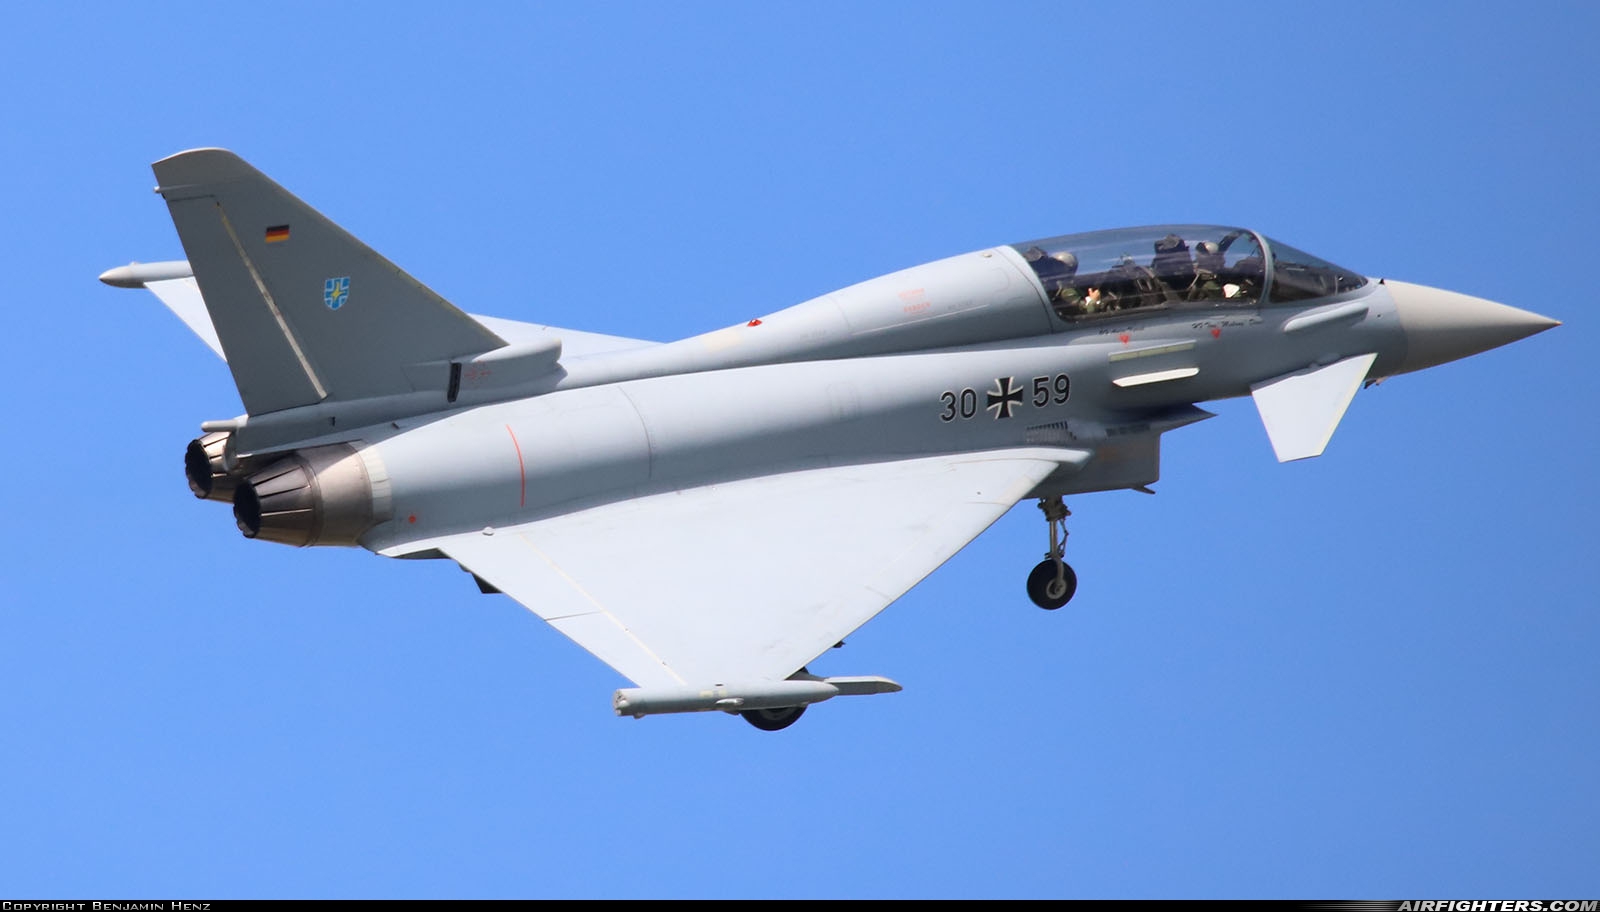 Germany - Air Force Eurofighter EF-2000 Typhoon T 30+59 at Rostock - Laage (RLG / ETNL), Germany